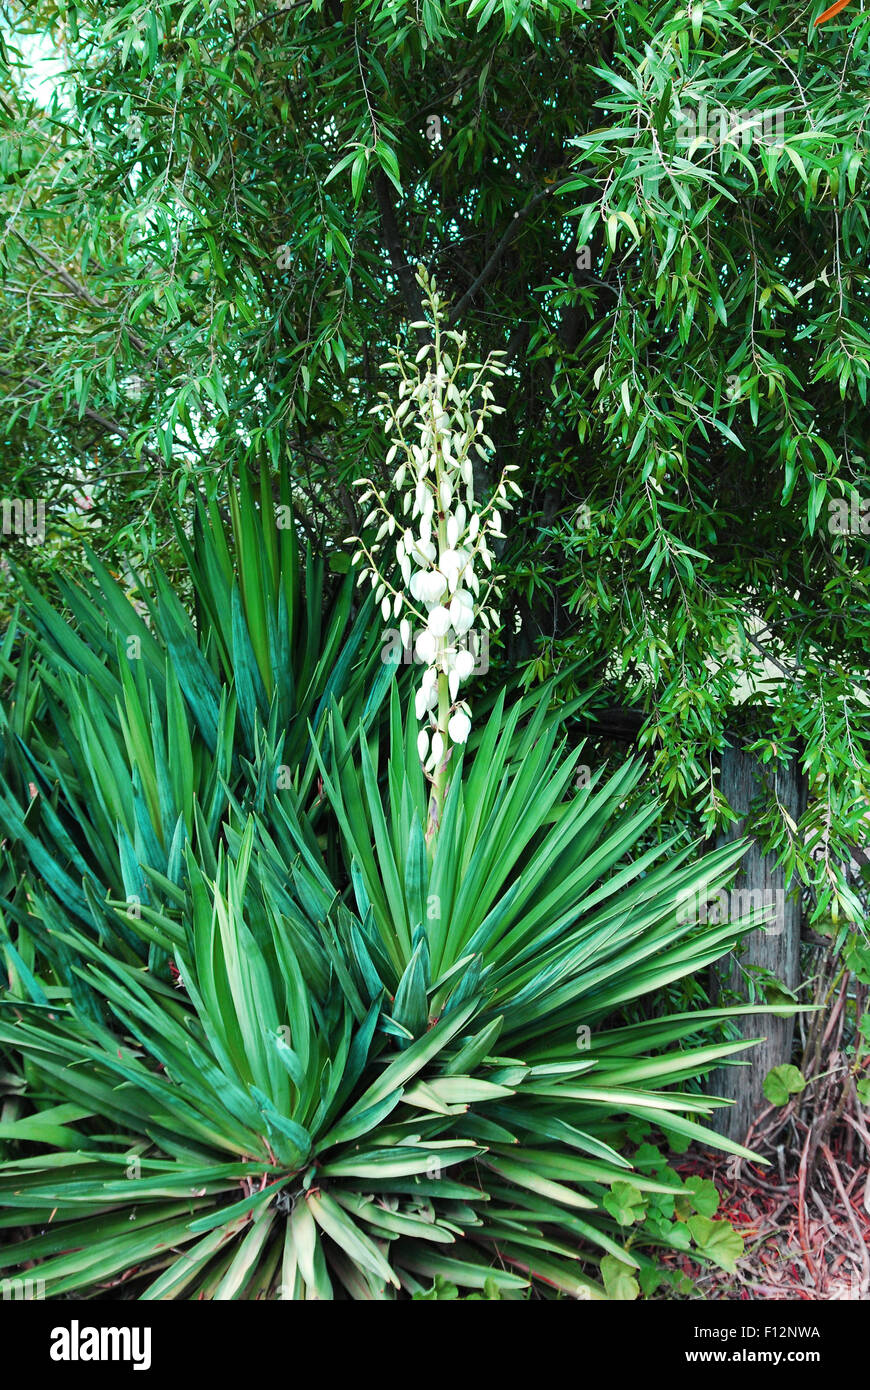 Yucca plant in flower Stock Photo